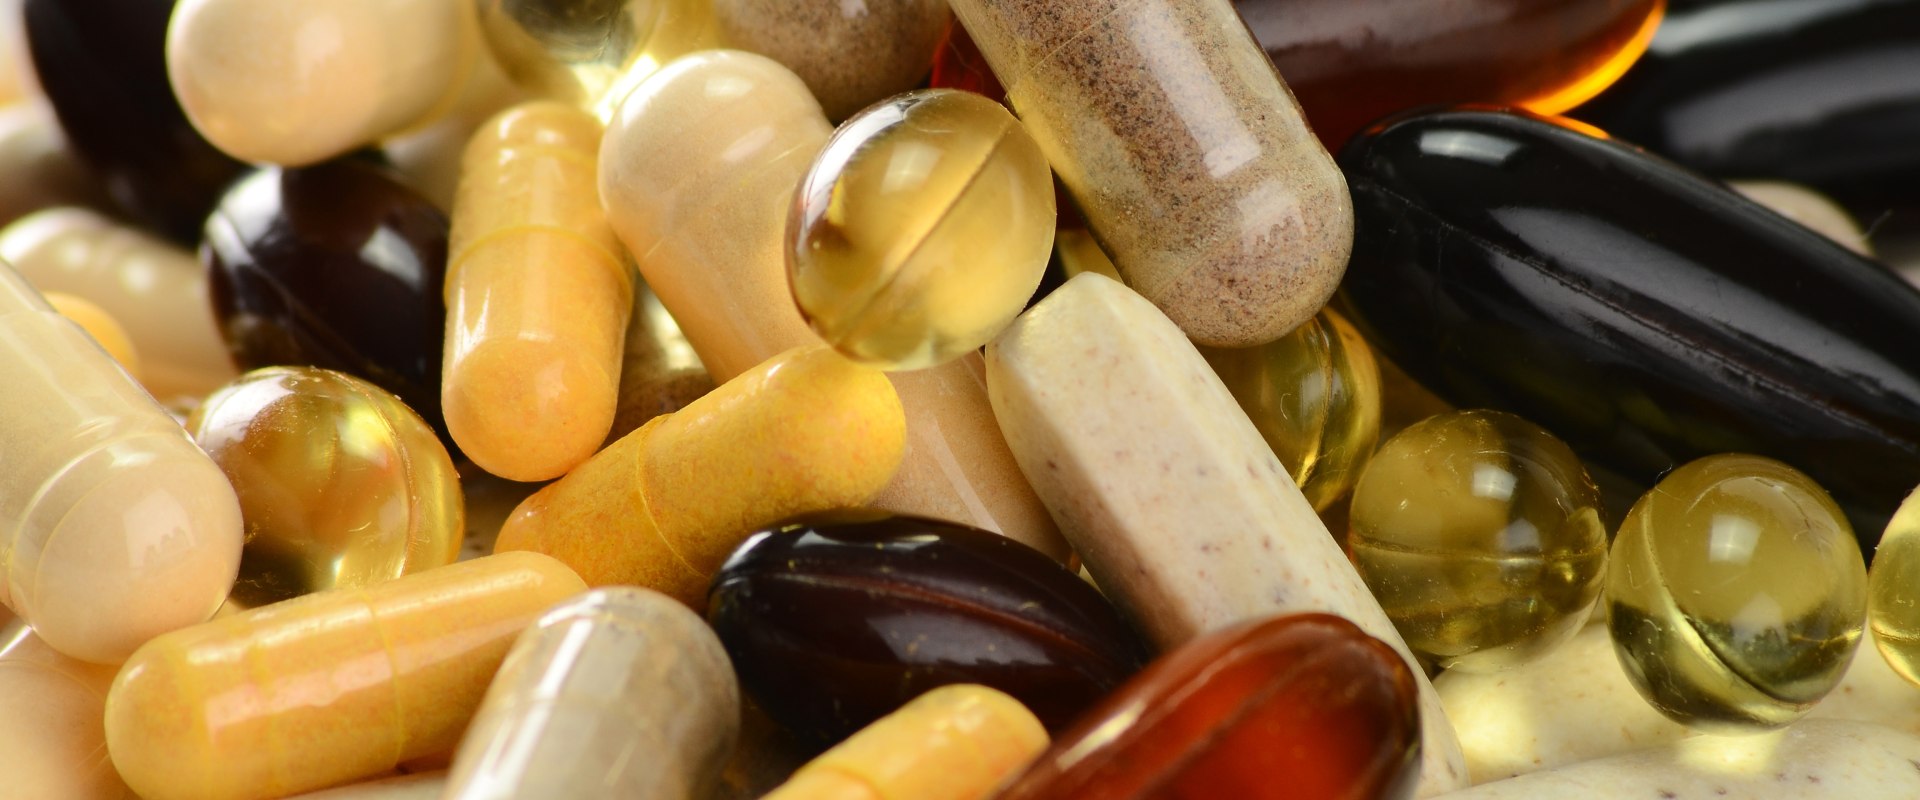 What is supplements and safety summary?